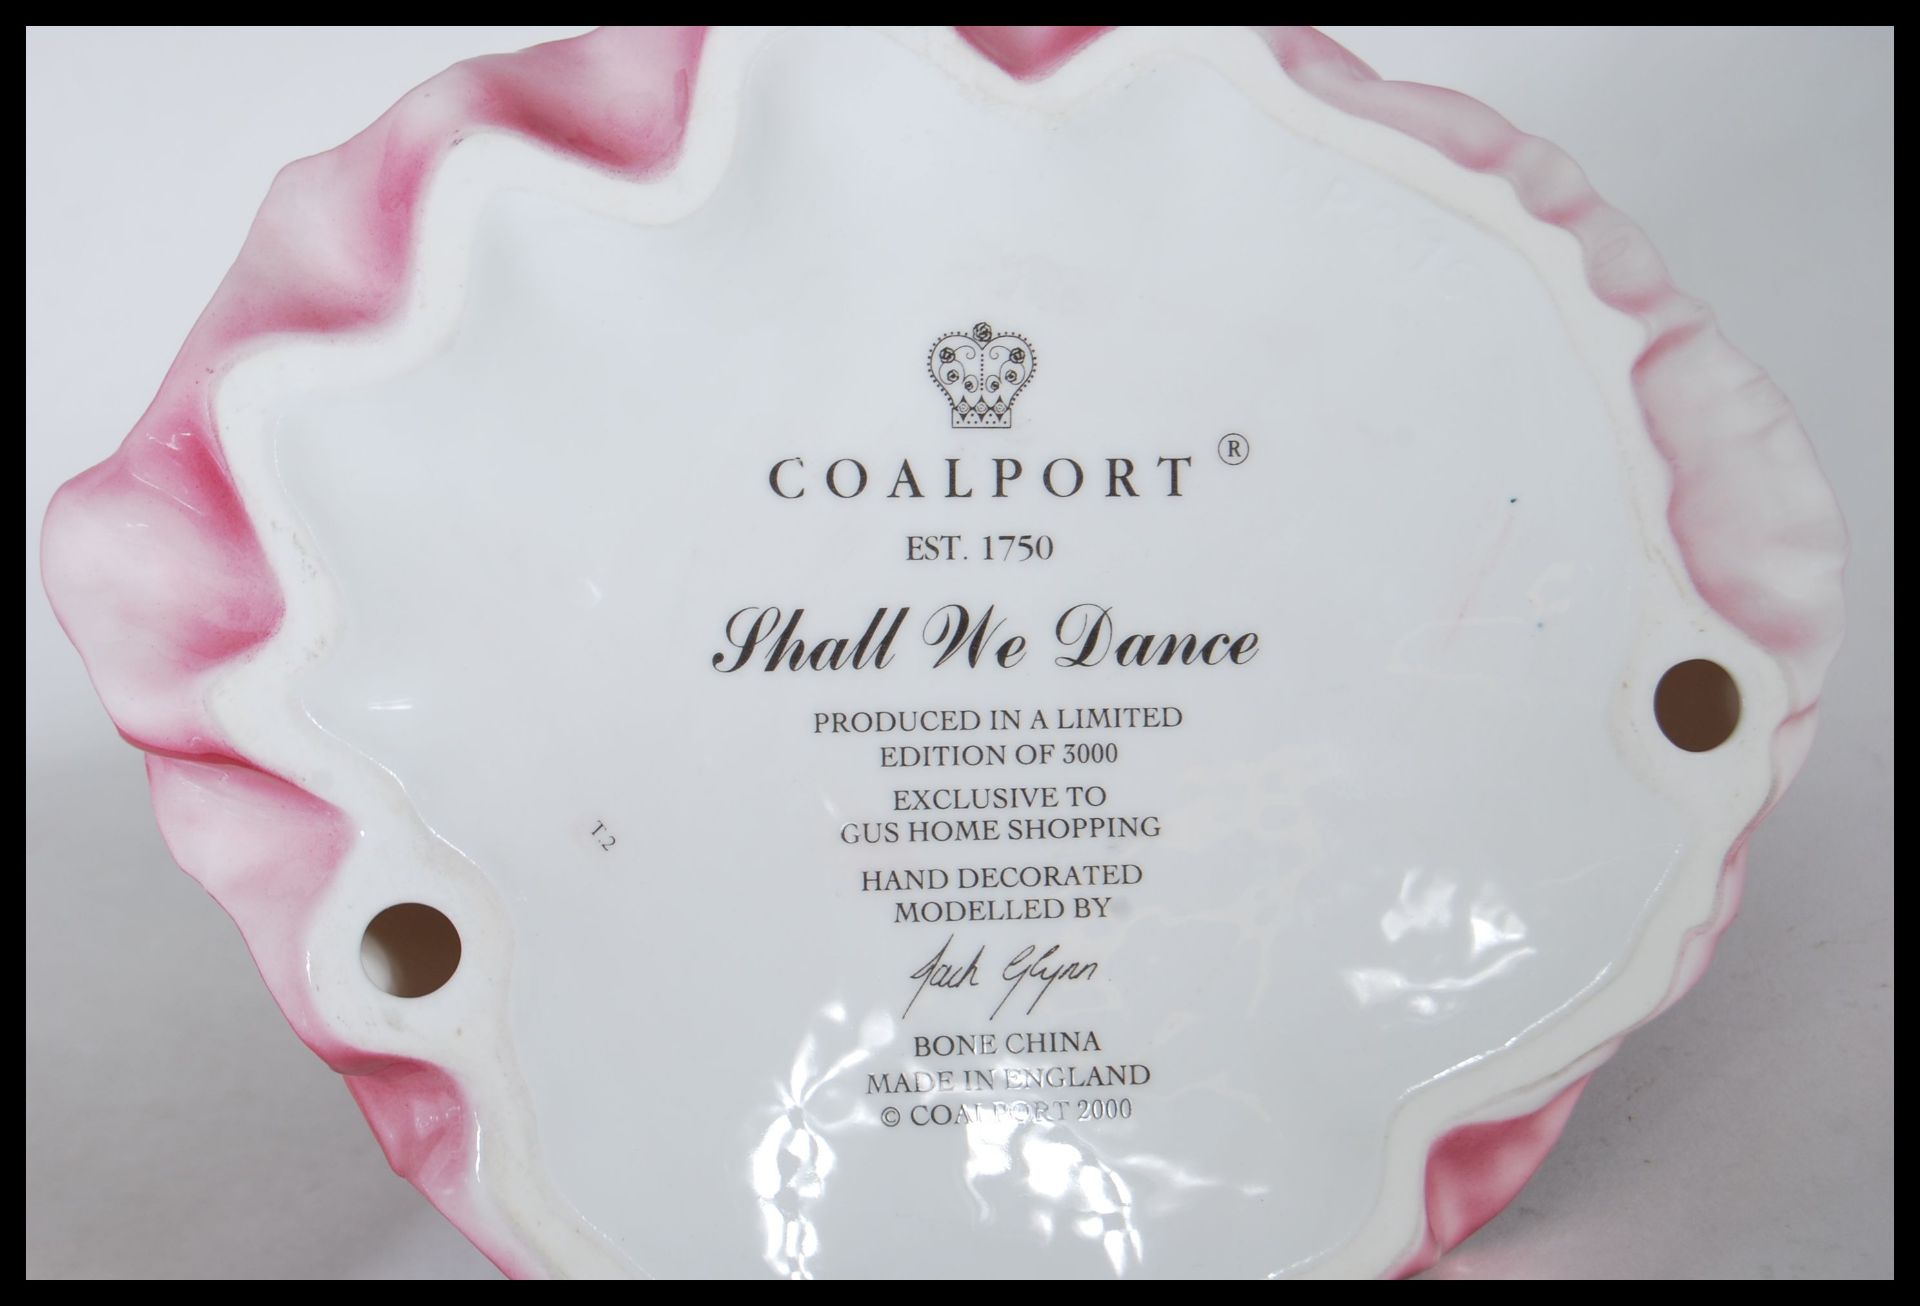 A Coalport Bone China ceramic figurine titled ' Shall We Dance ', produced in a limited edition of - Image 7 of 7